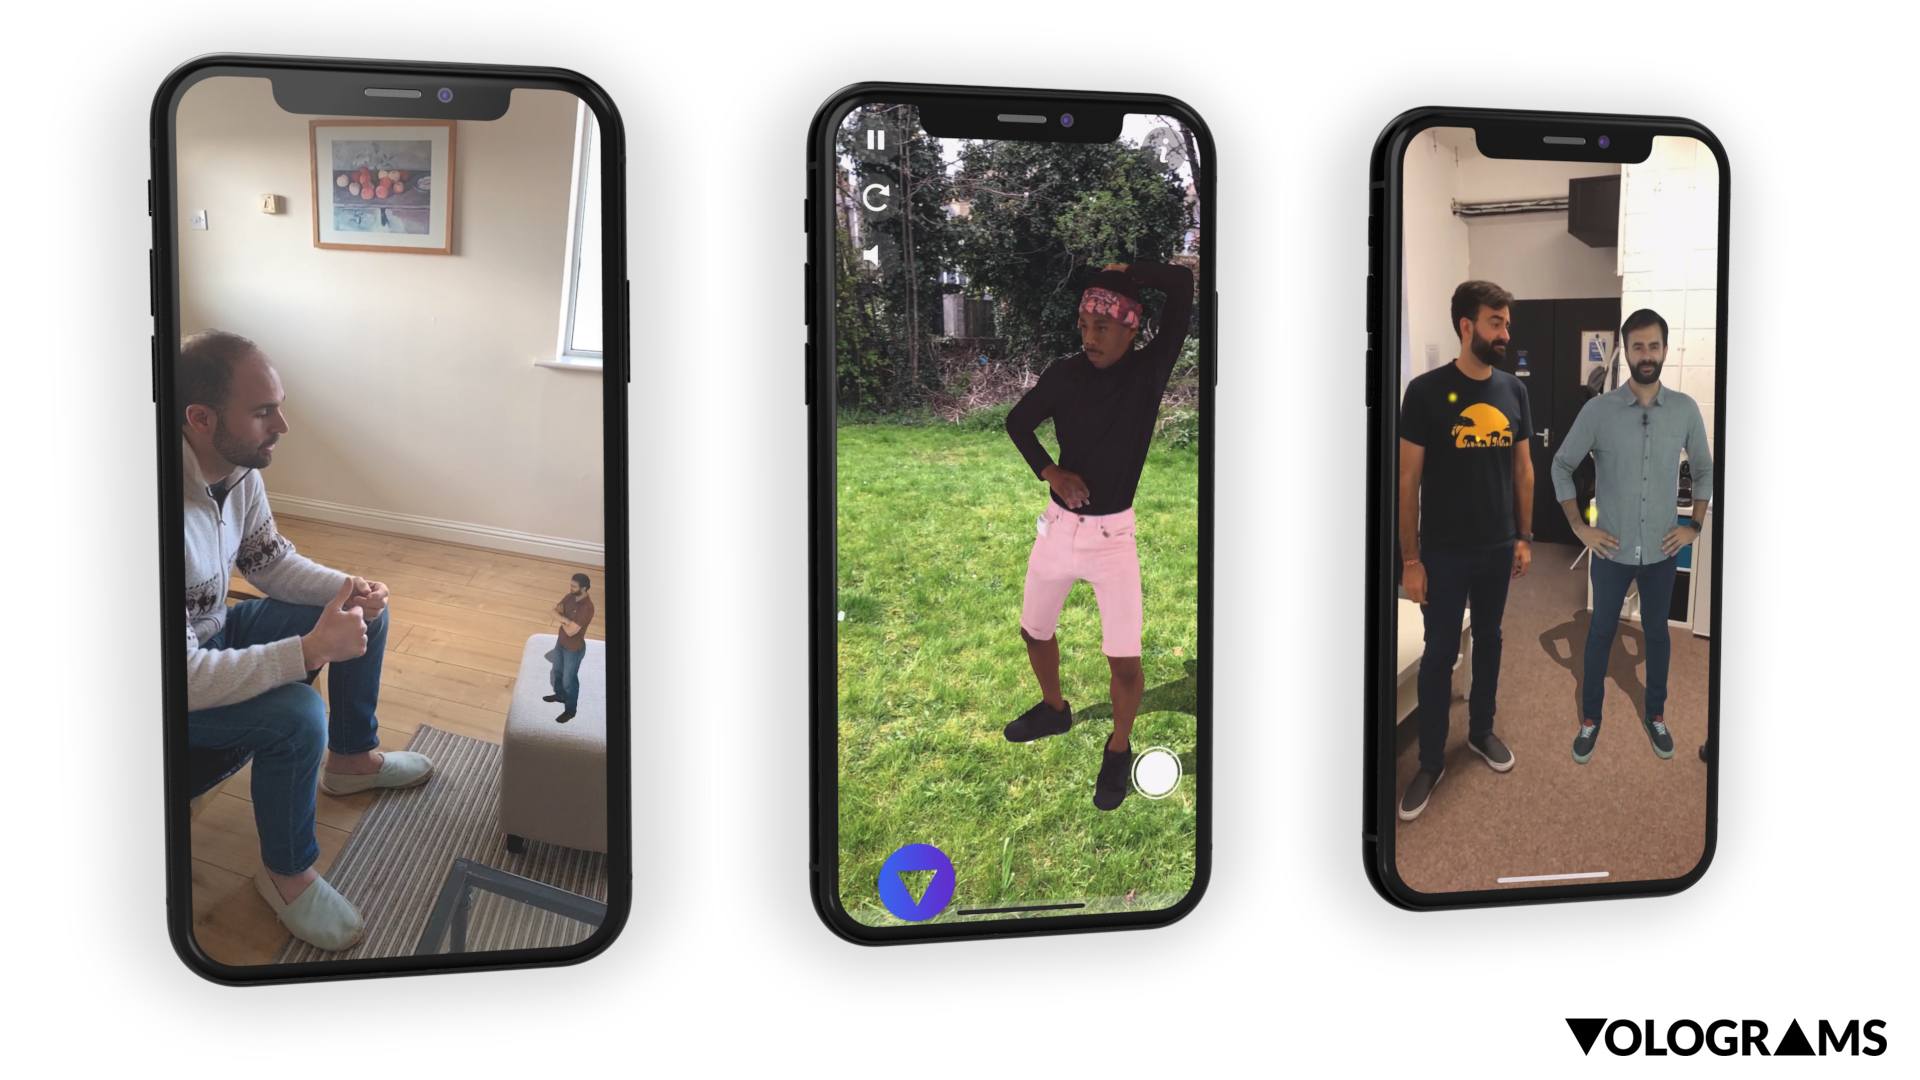 Three iPhone screens displaying Volograms of people inserted into different scenarios.